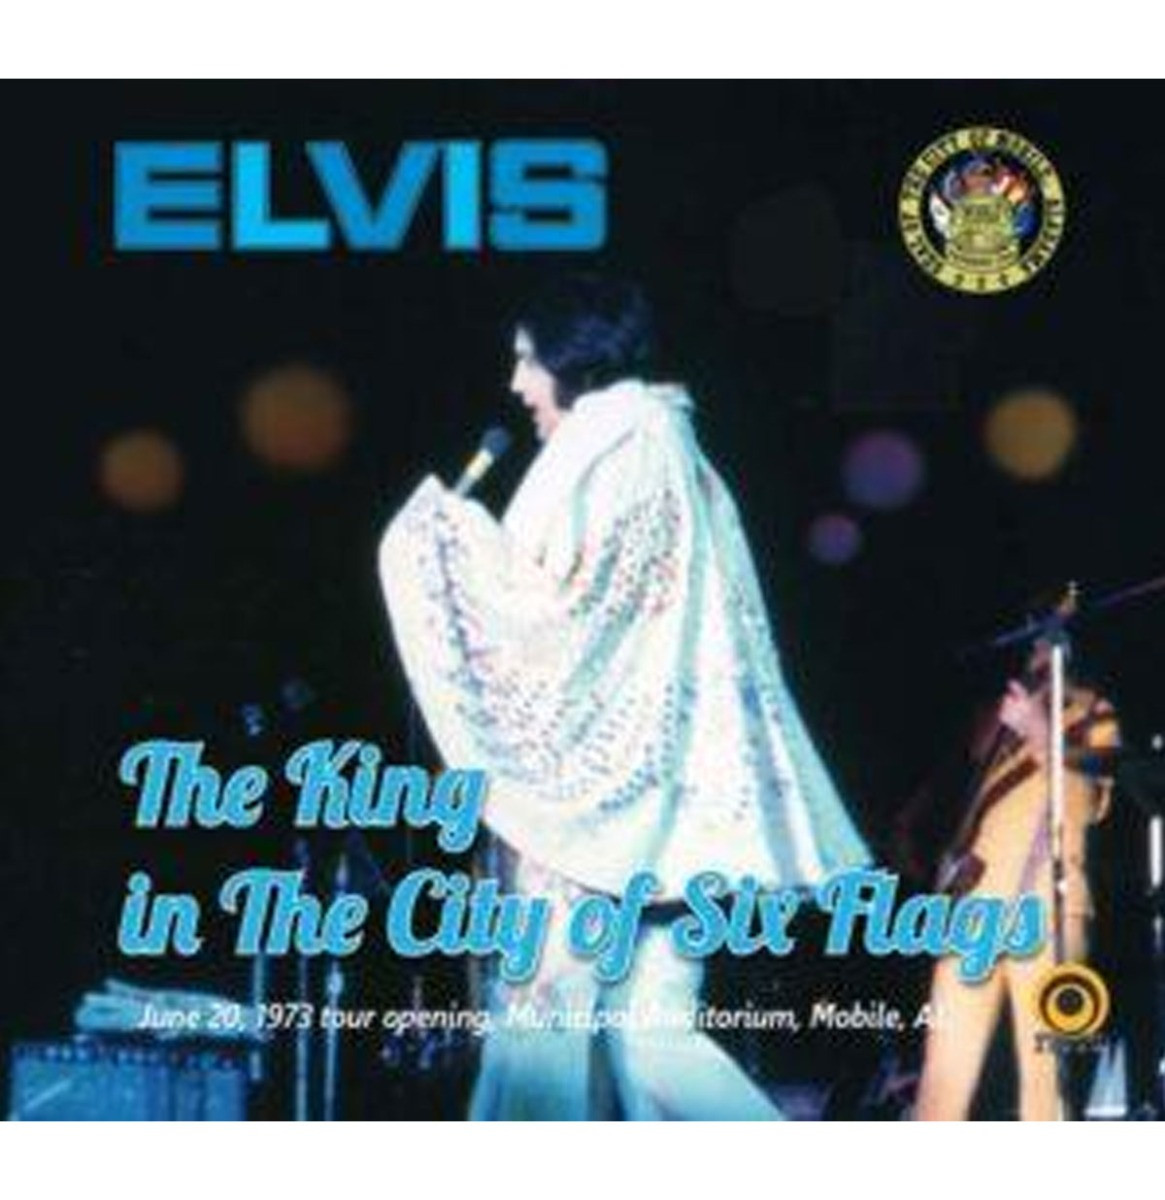 Elvis Presley - The king in the city of six flags CD